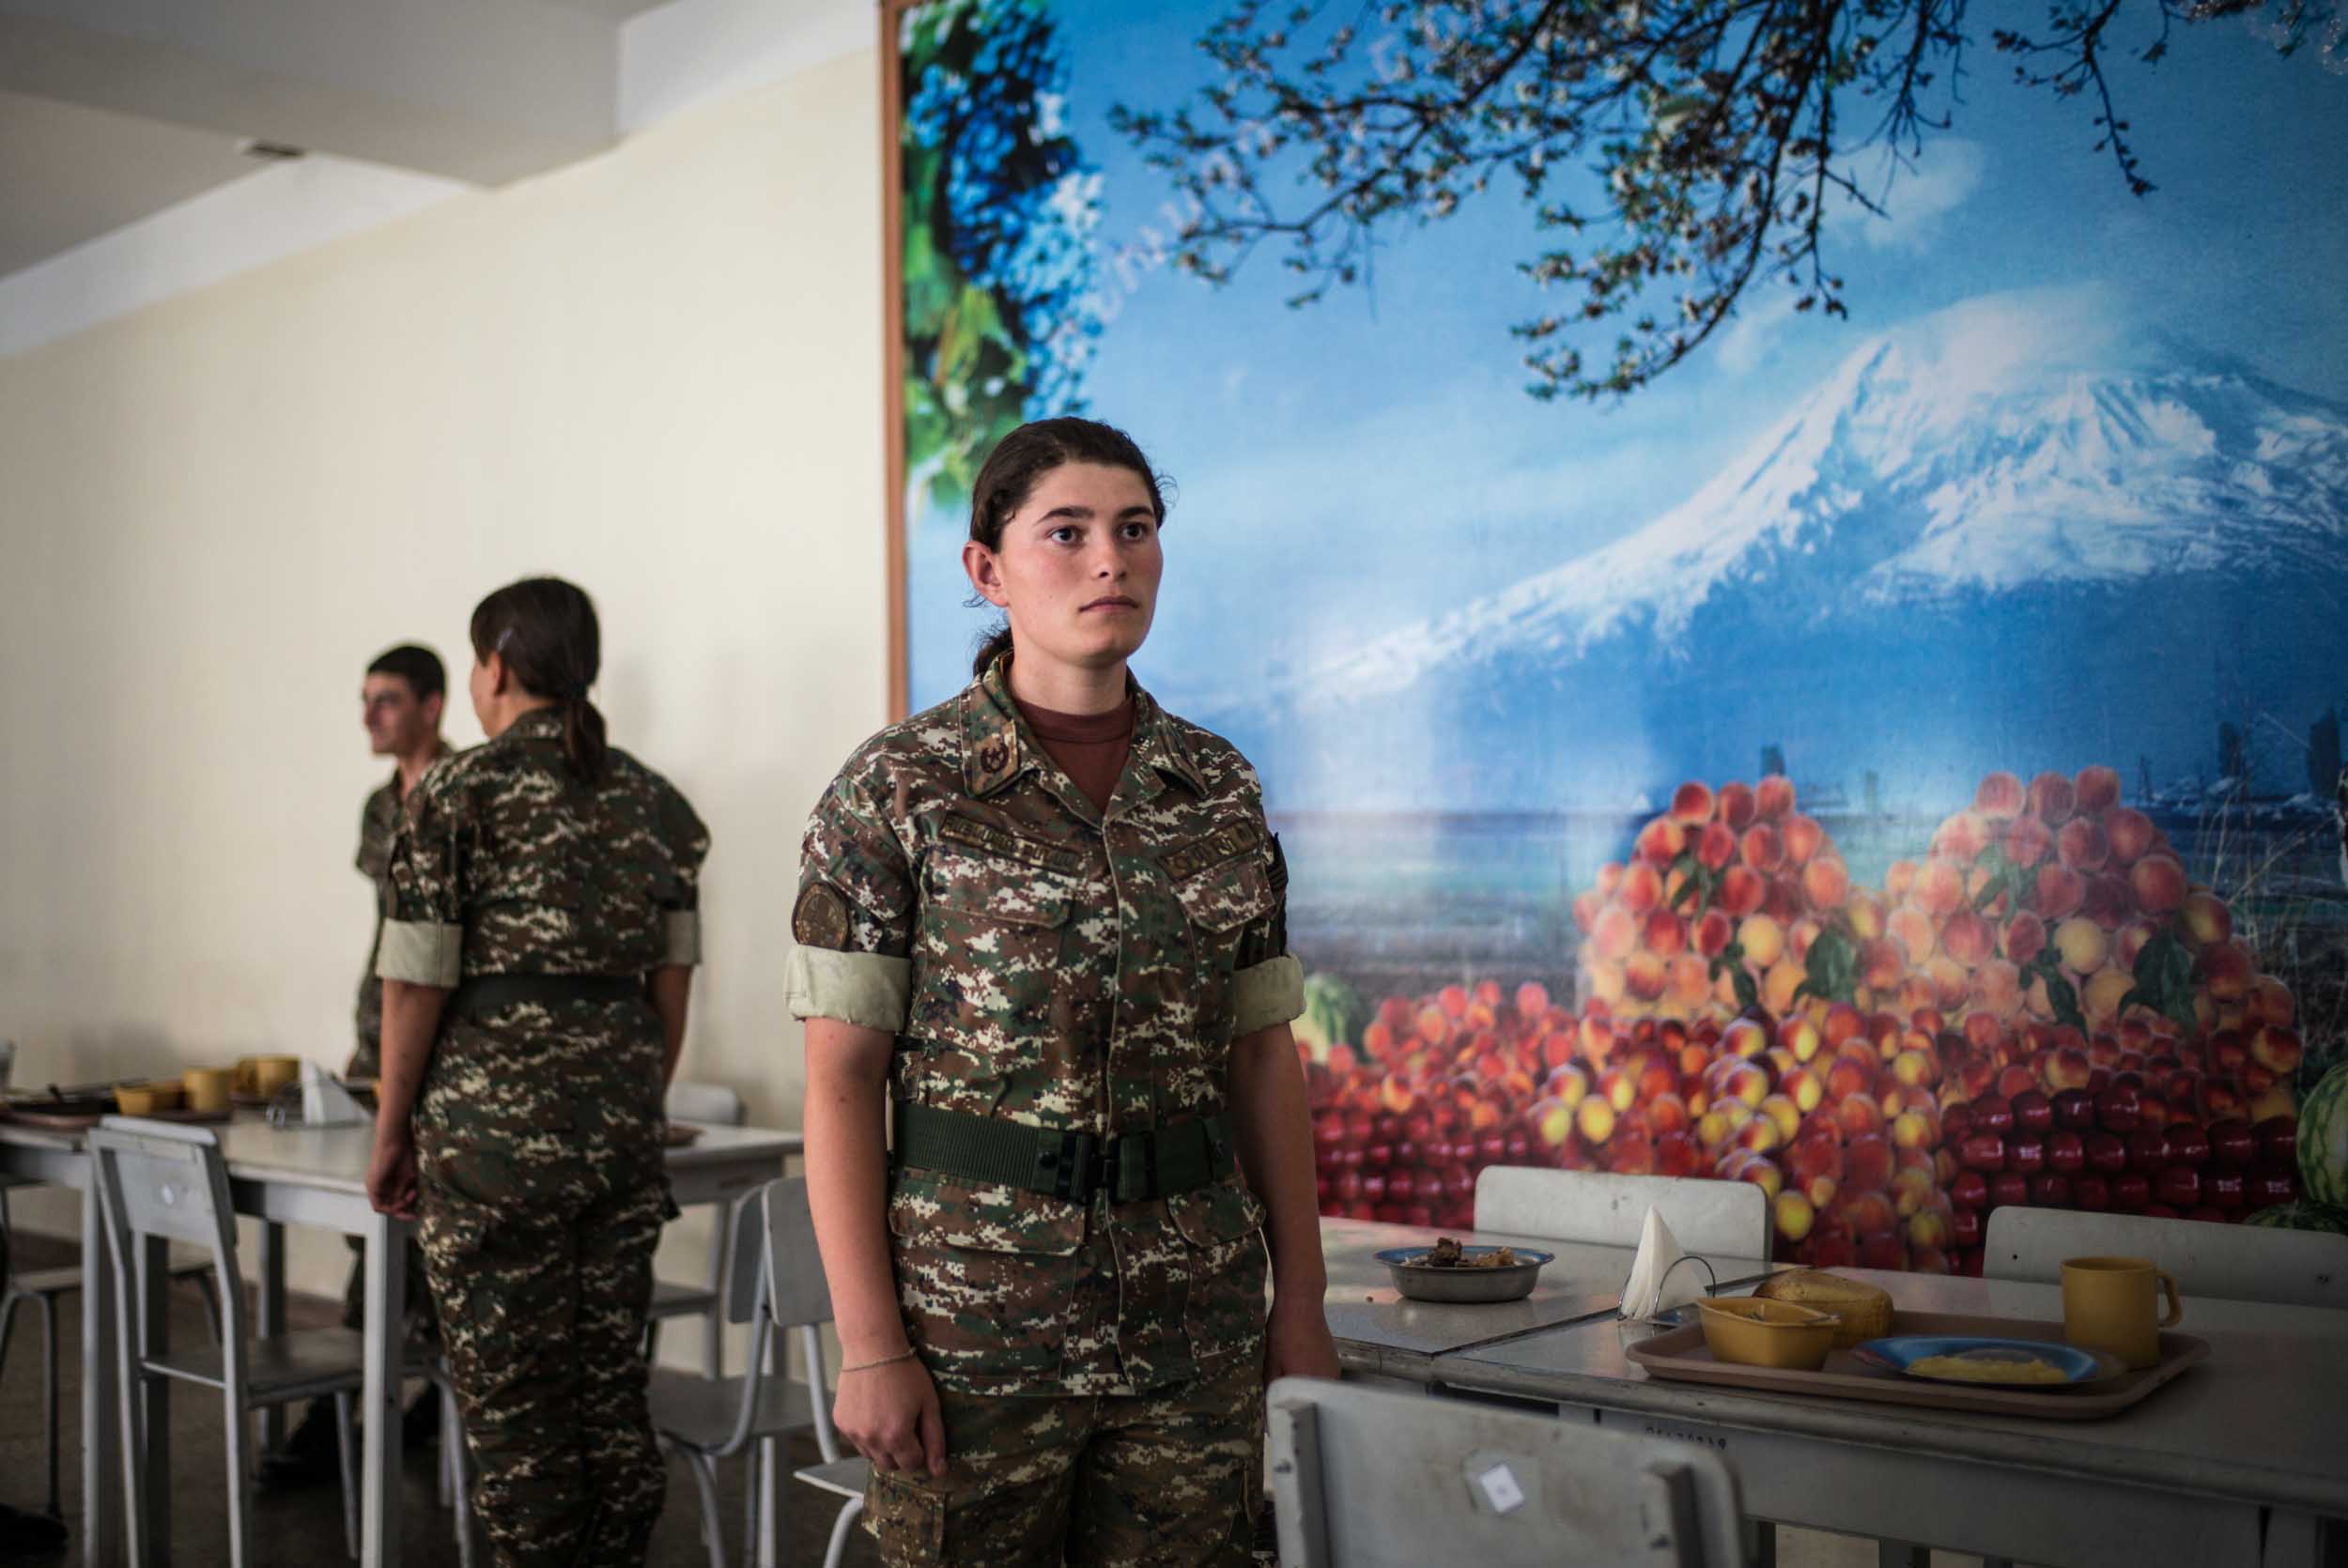  Seda, 21, and students are praying during lunch at Military University in Yerevan, Armenia. She is one of the 23 female students who entered for the first time in 2014 the military University in Armenias capital Yerevan.“Women can be cold-blooded, i